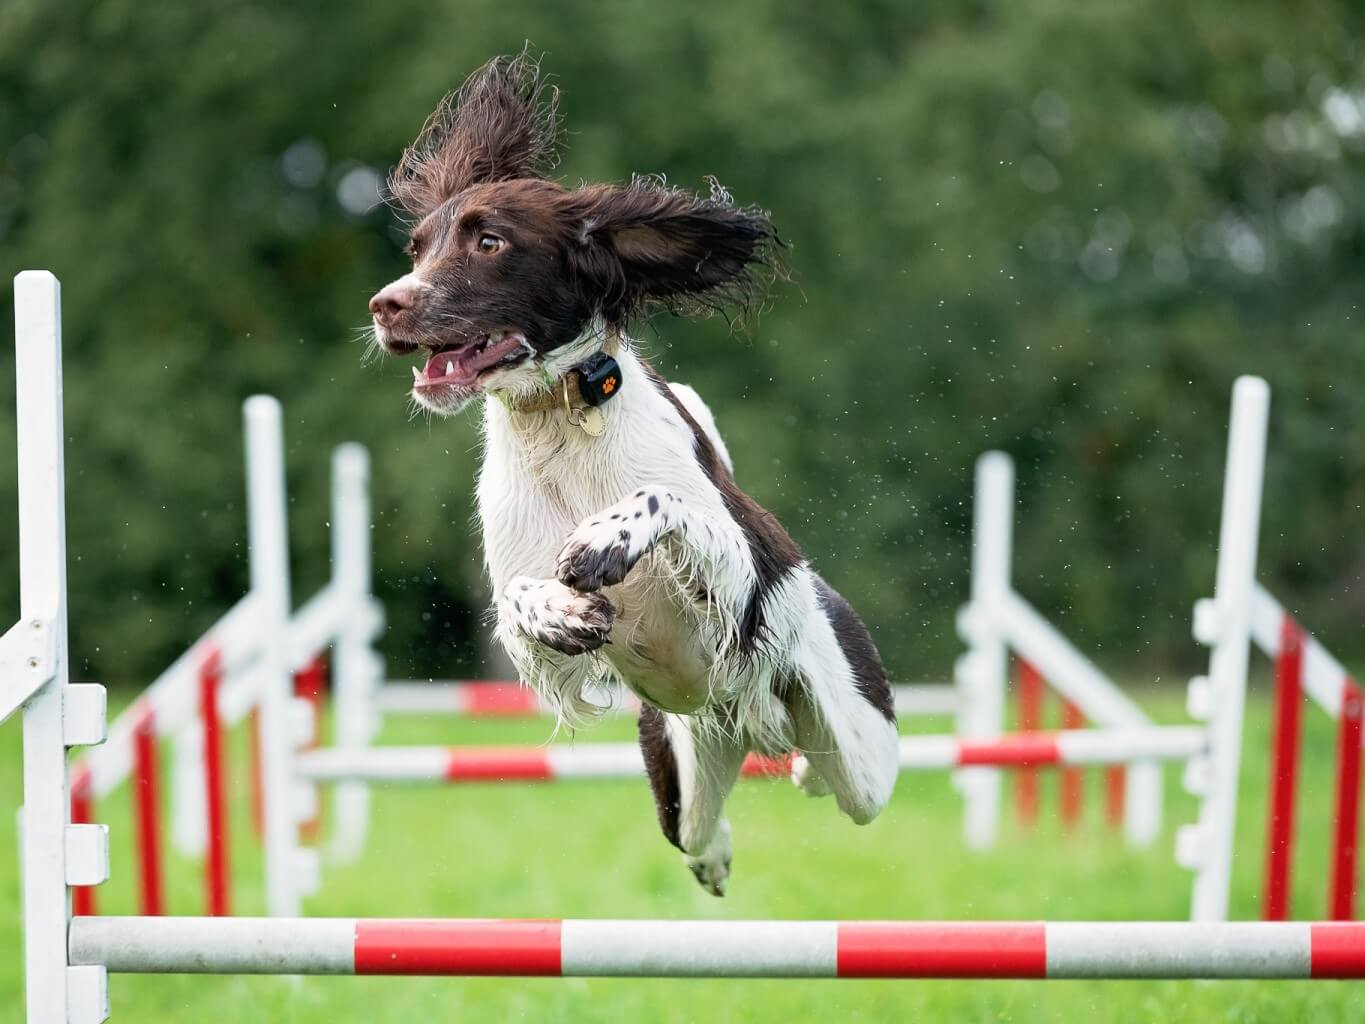 https://www.pitpat.com/wp-content/uploads/2020/06/Dog_-rights_MS_outdoors_active_jumping-over-hurdles-_springer-spaniel_@_lifewithloki-1.jpg